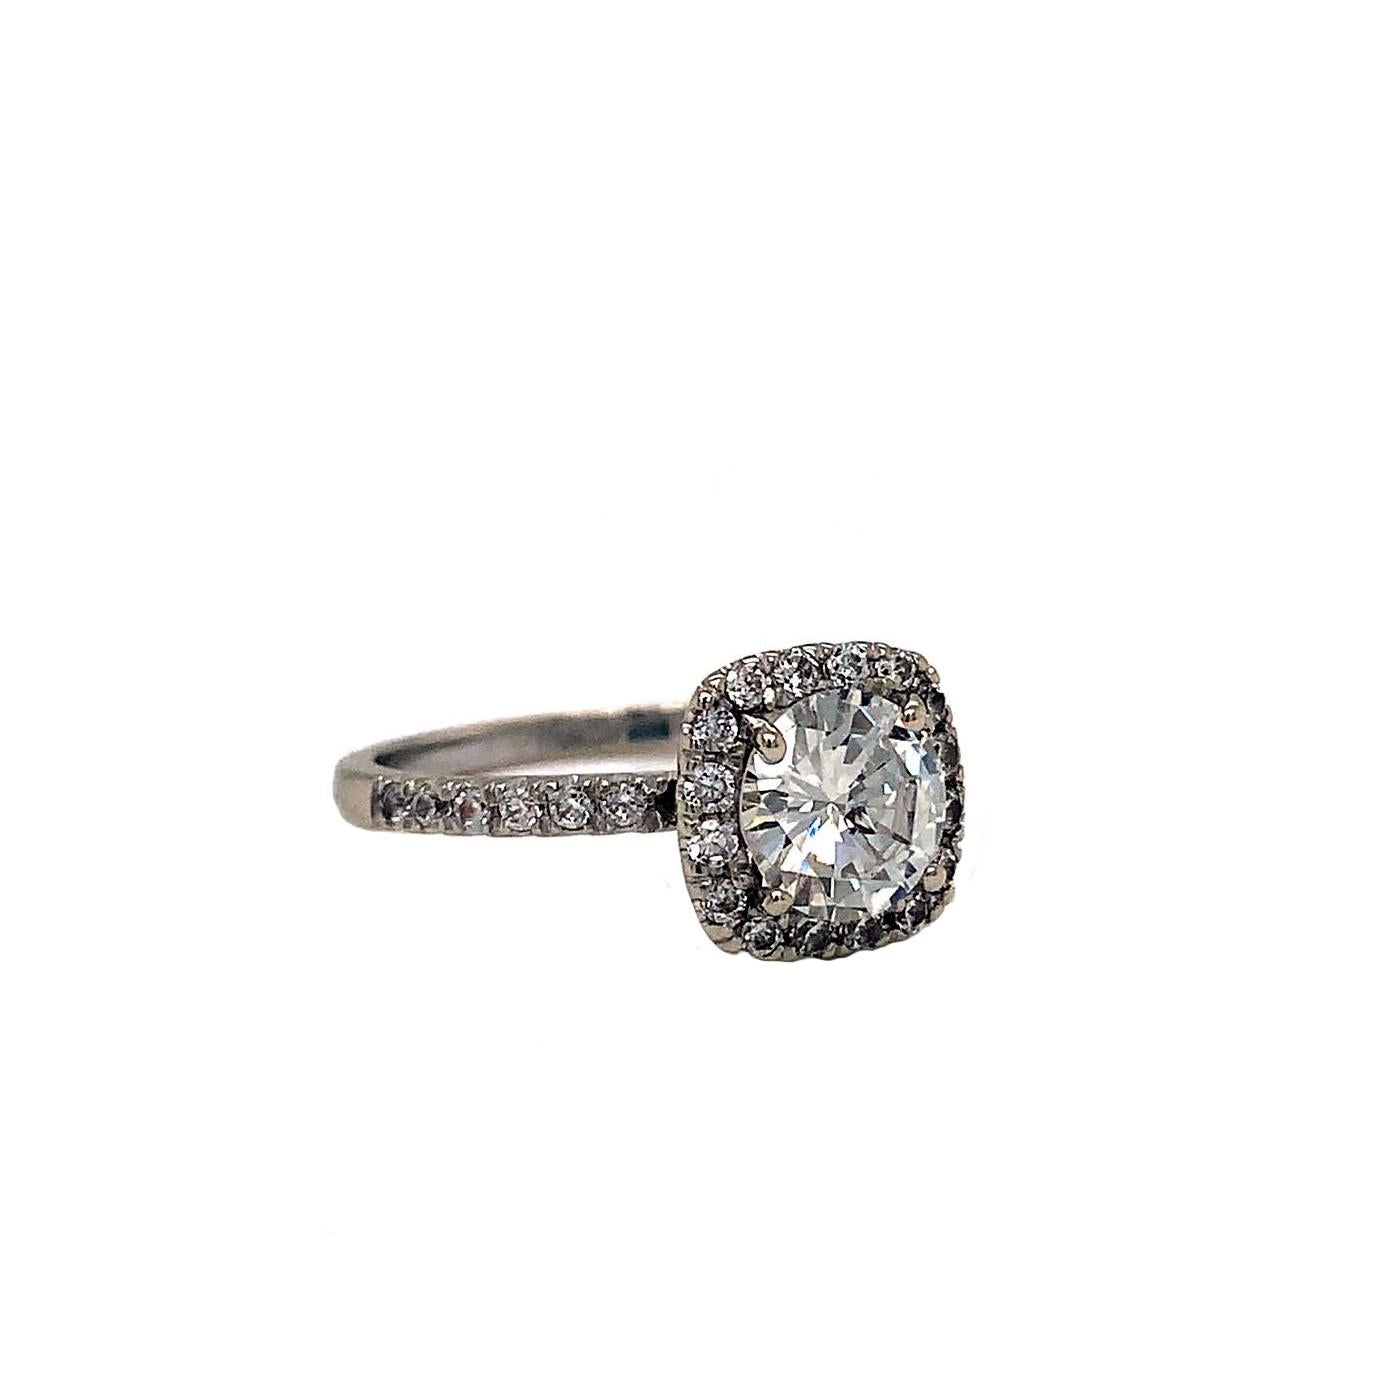 Timeless and elegant, The round brilliant cut diamond is a frame with a Halo-shaped diamond. Adding to its appeal, the halo diamond and shank draw attention and add sparkle to the center stone. This outstanding engagement ring is masterfully